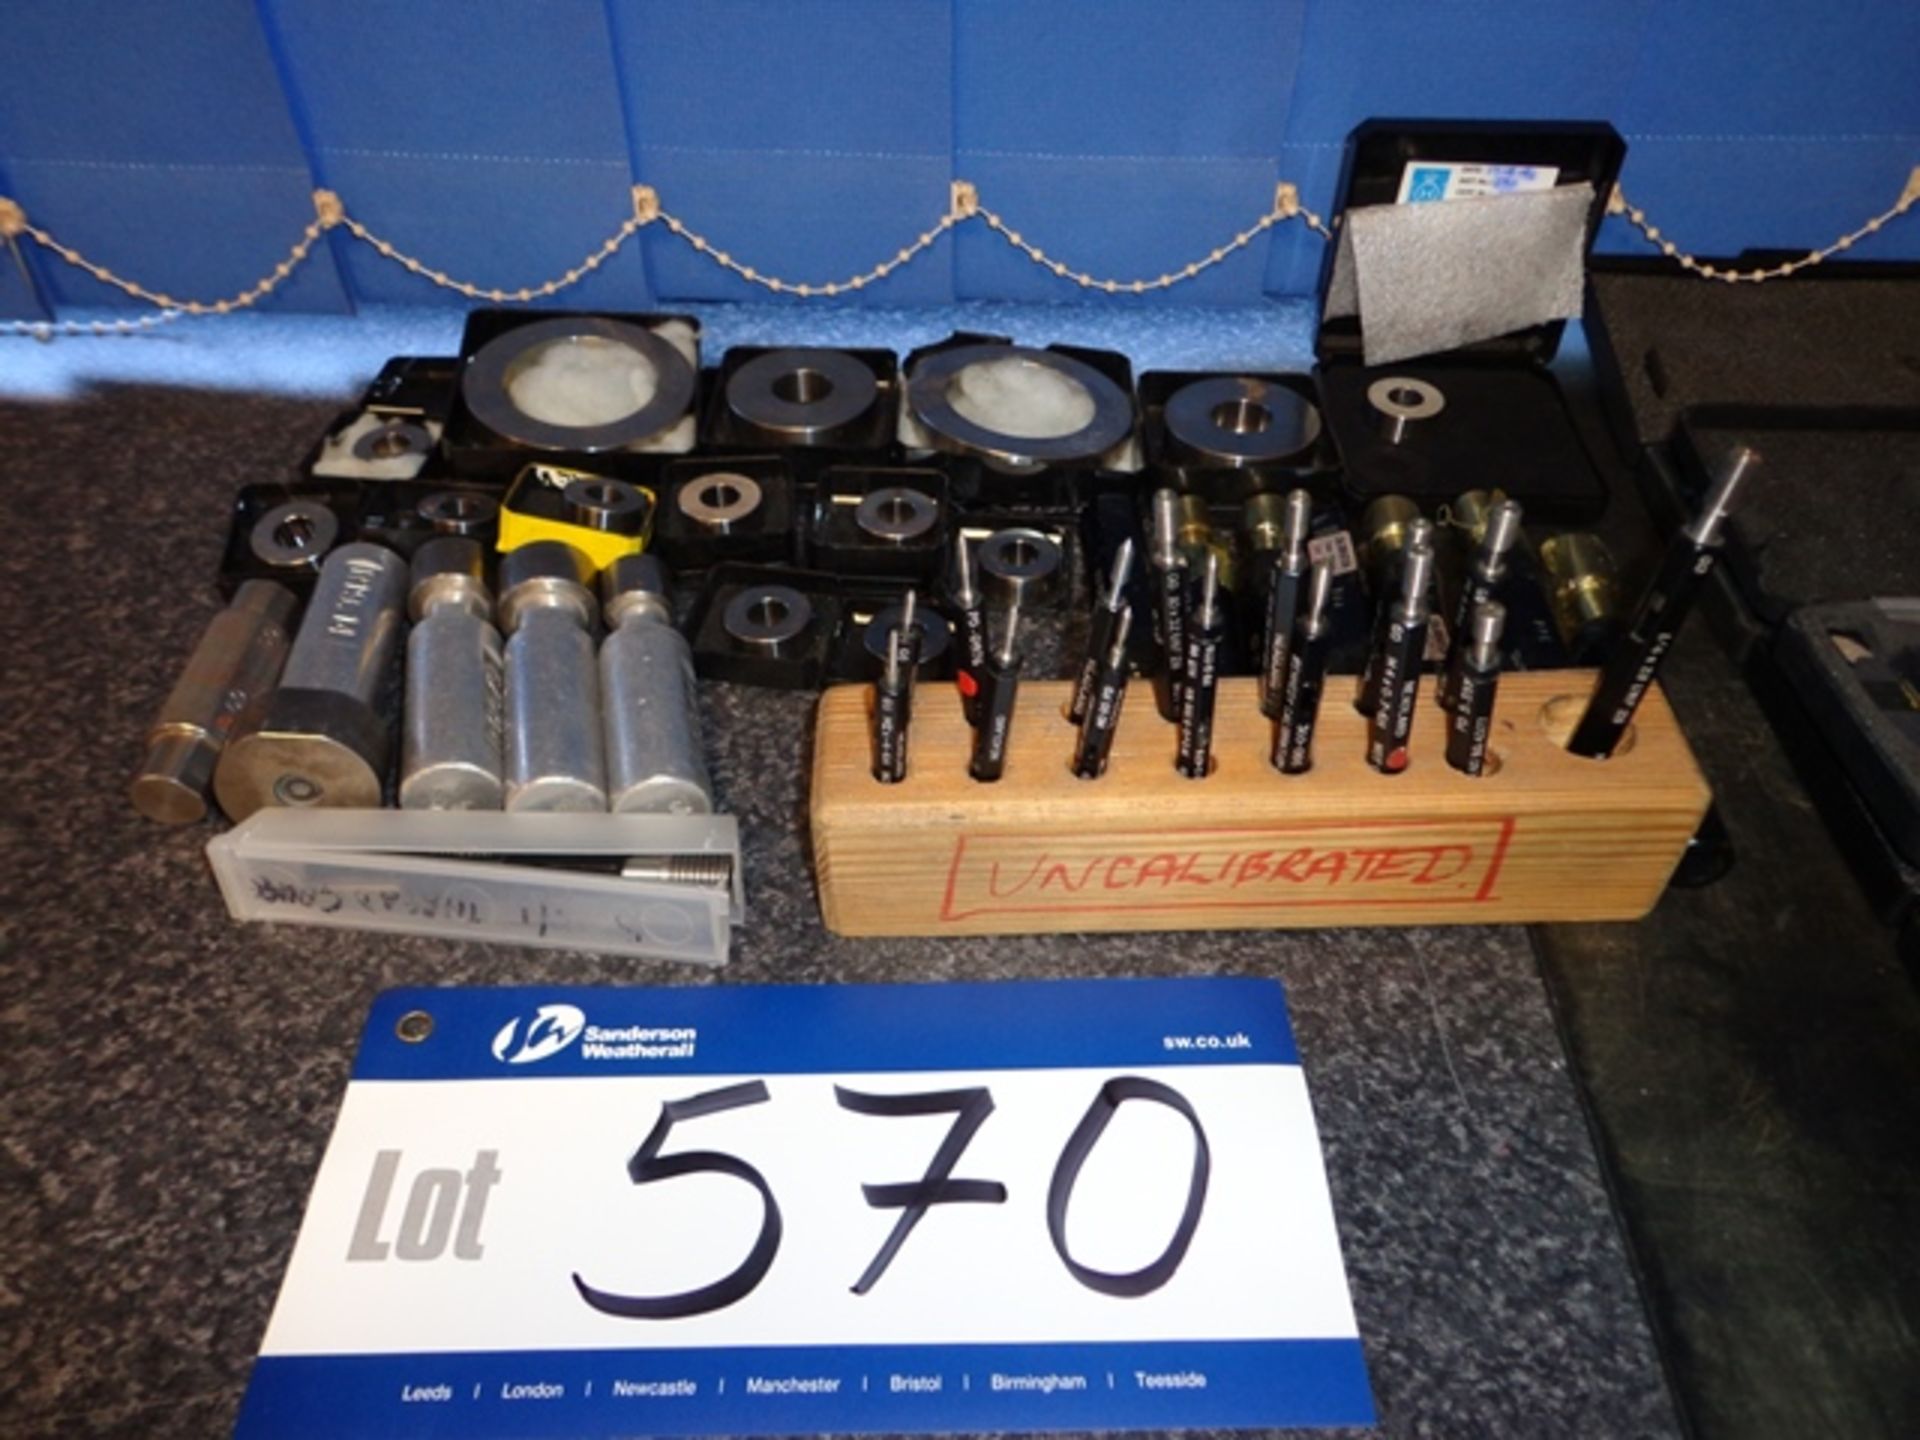 Quantity of Bore and Thread Gauges as set out